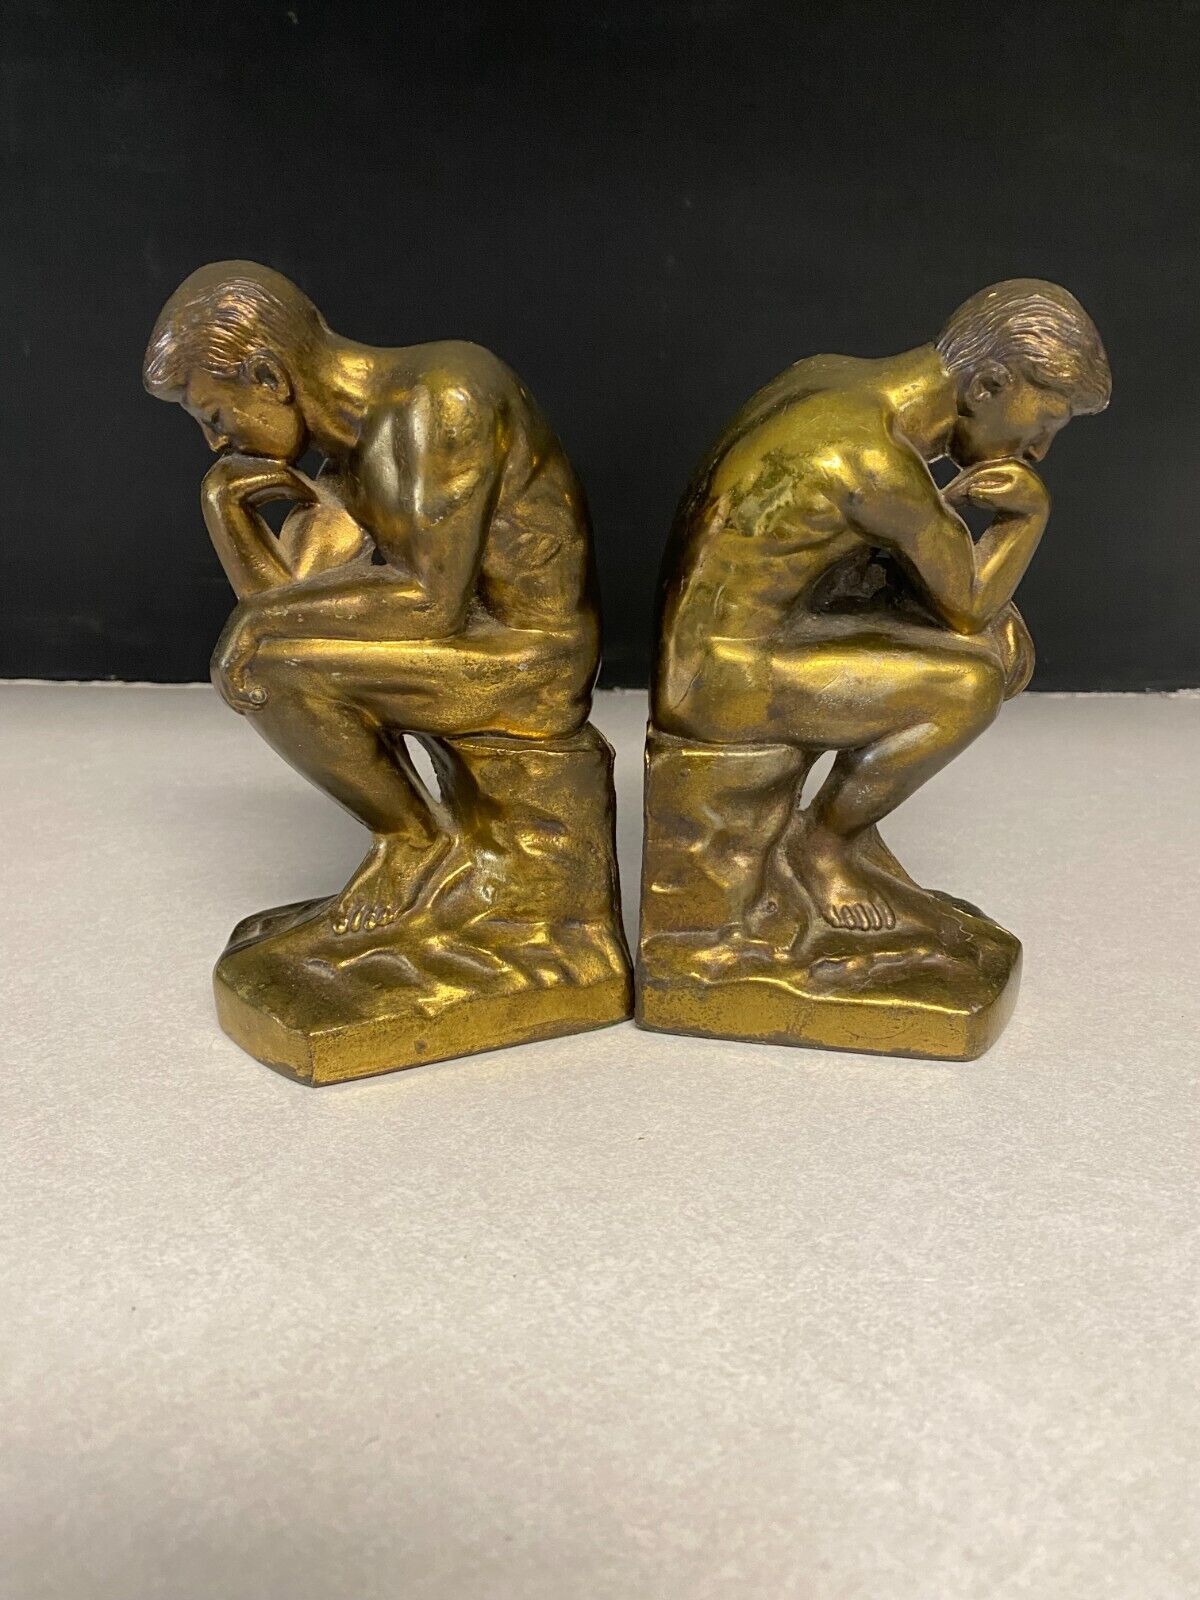 The Thinker  Brass Finish Metal Bookends   Vintage  C1928   Rodin   Thinking Man